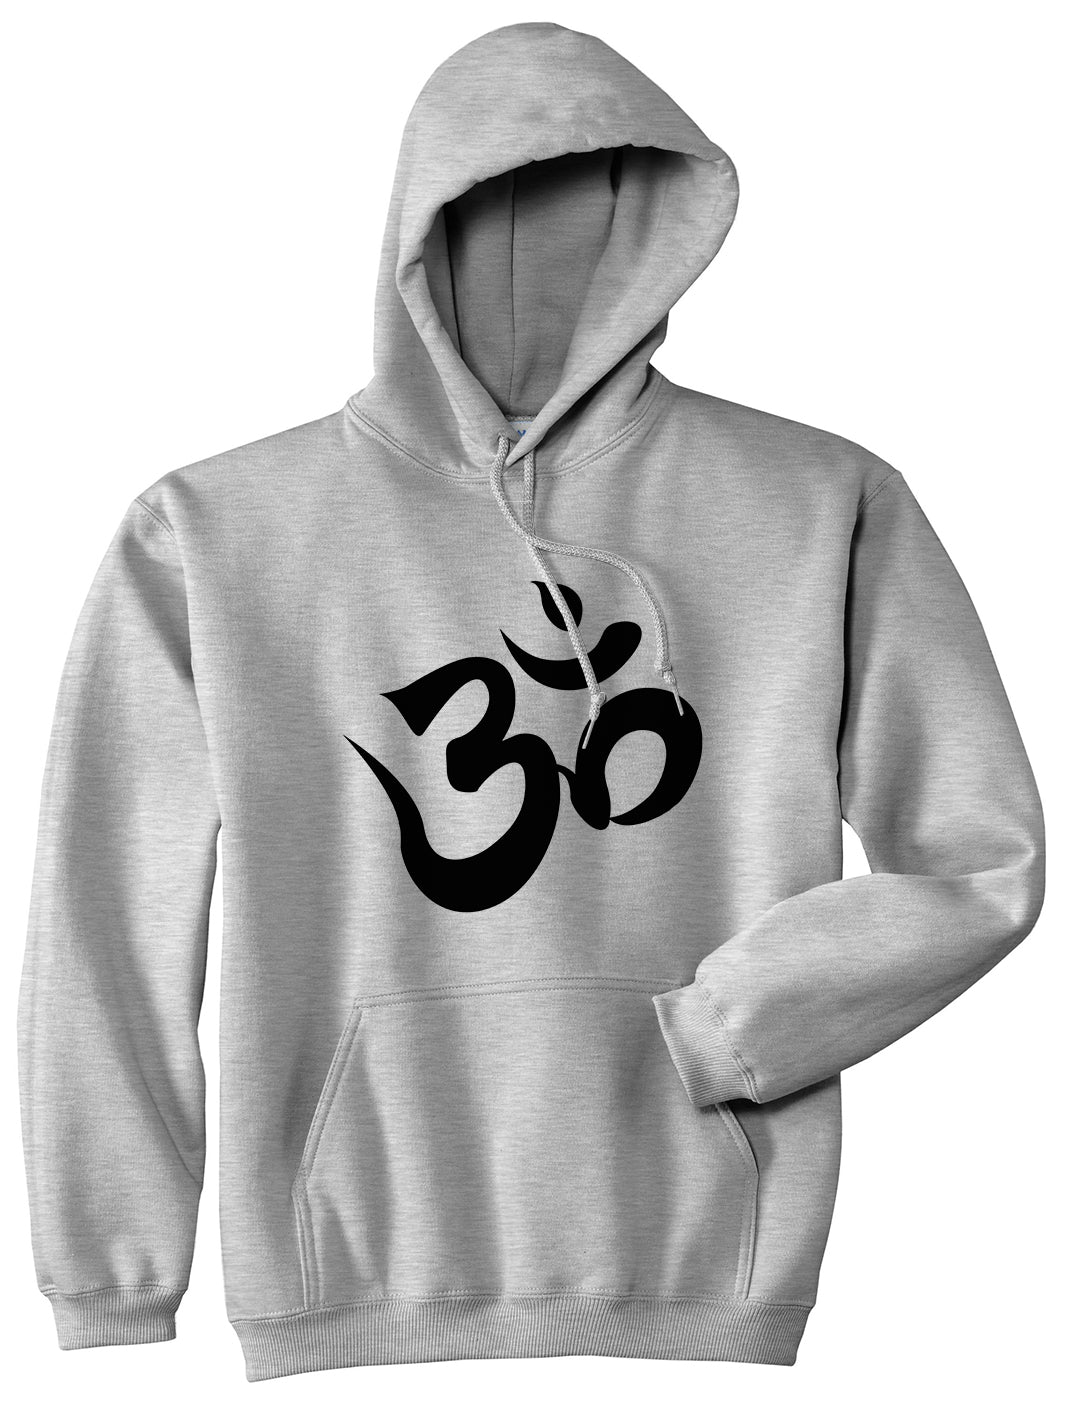 Om Ohm Symbol Grey Pullover Hoodie by Kings Of NY